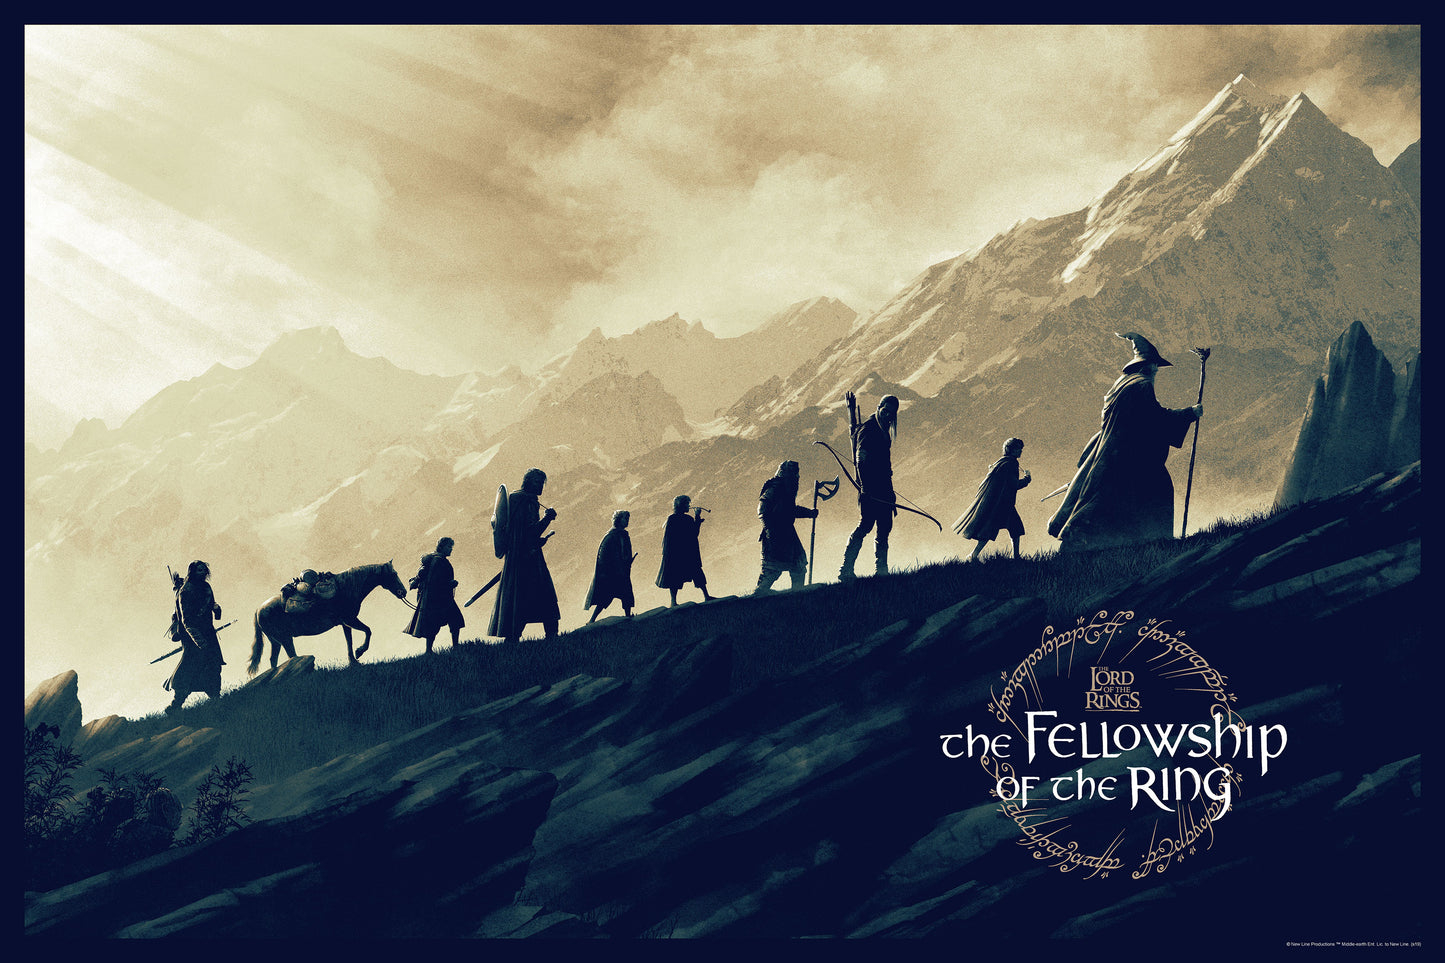 Matt Ferguson "The Lord of the Rings: The Fellowship of the Ring"